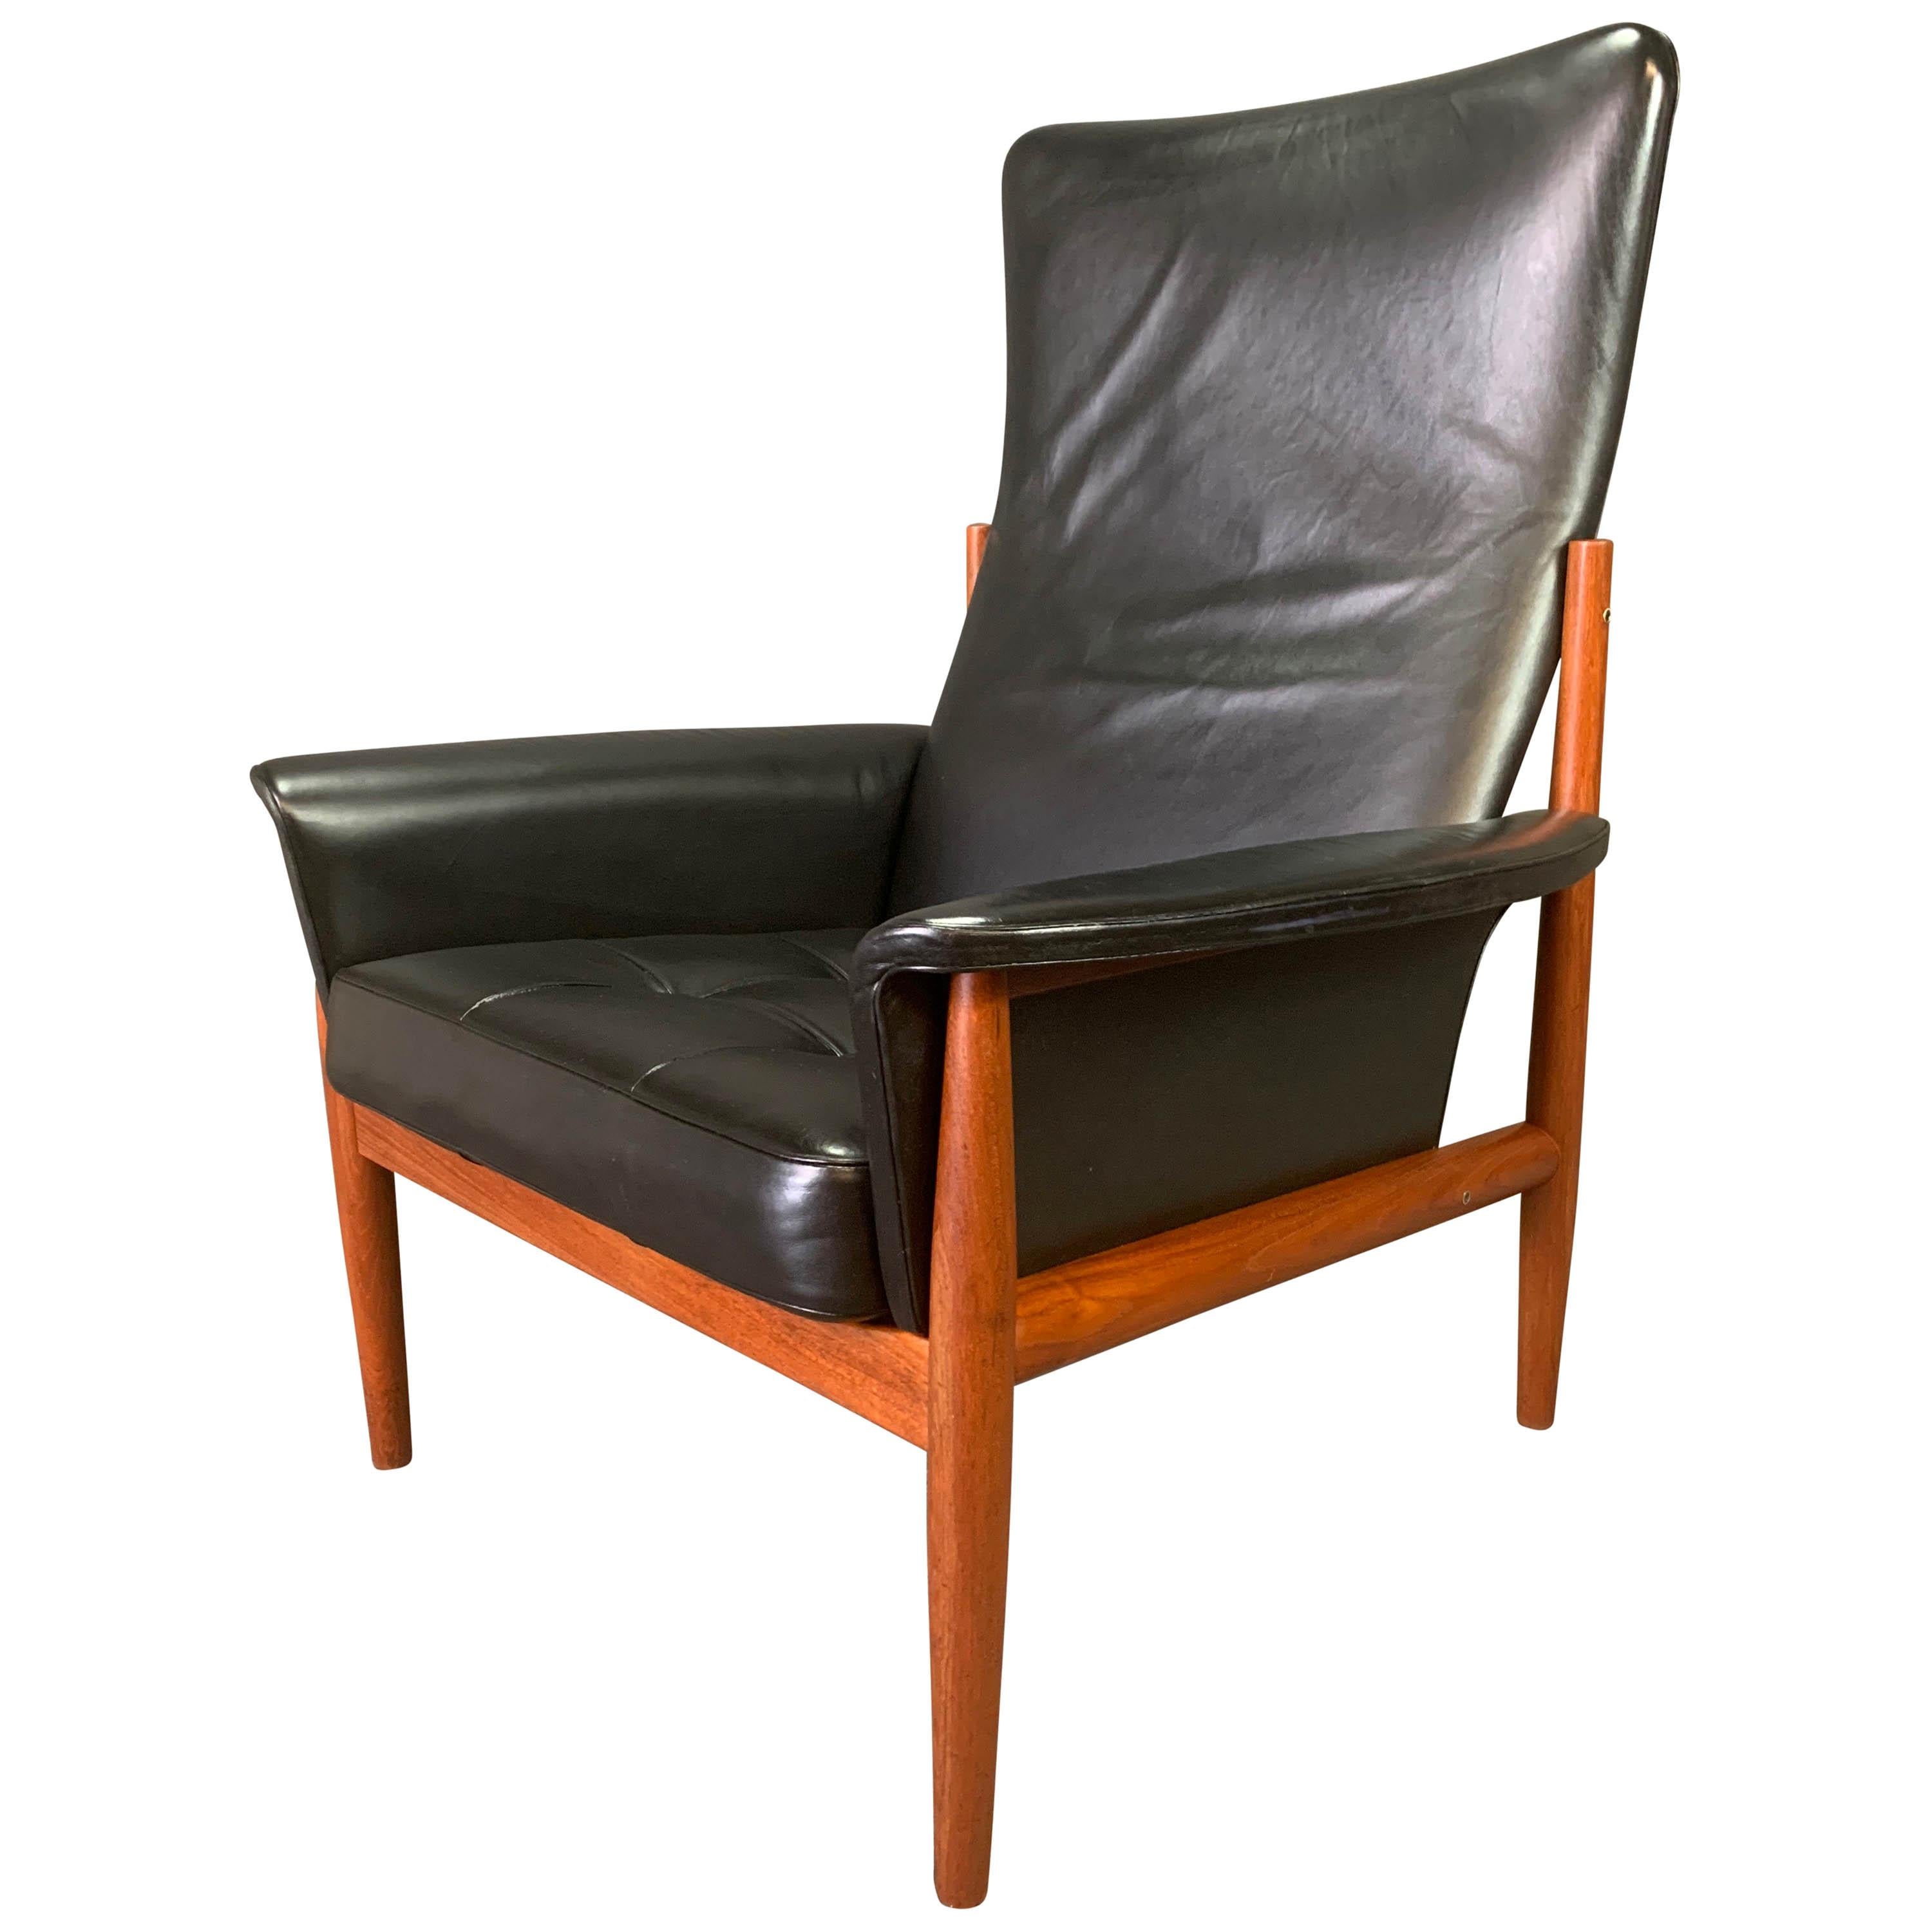 Vintage Danish Midcentury Teak and Leather Lounge Chair by Grete Jalk For Sale